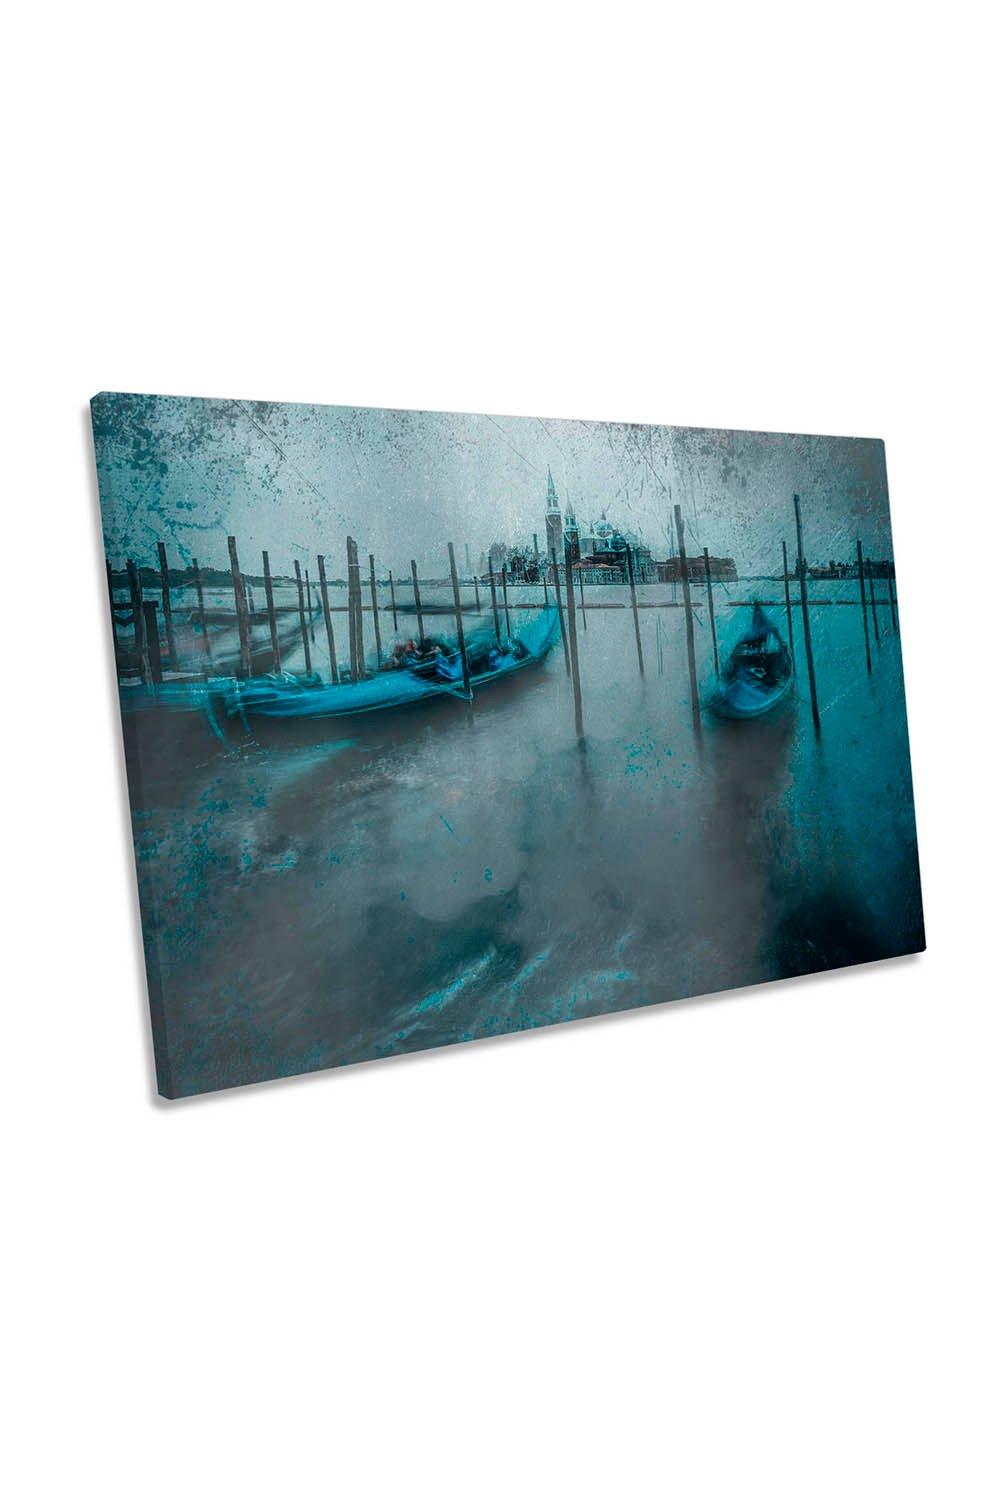 Venice Abstract Canal Boats City Canvas Wall Art Picture Print